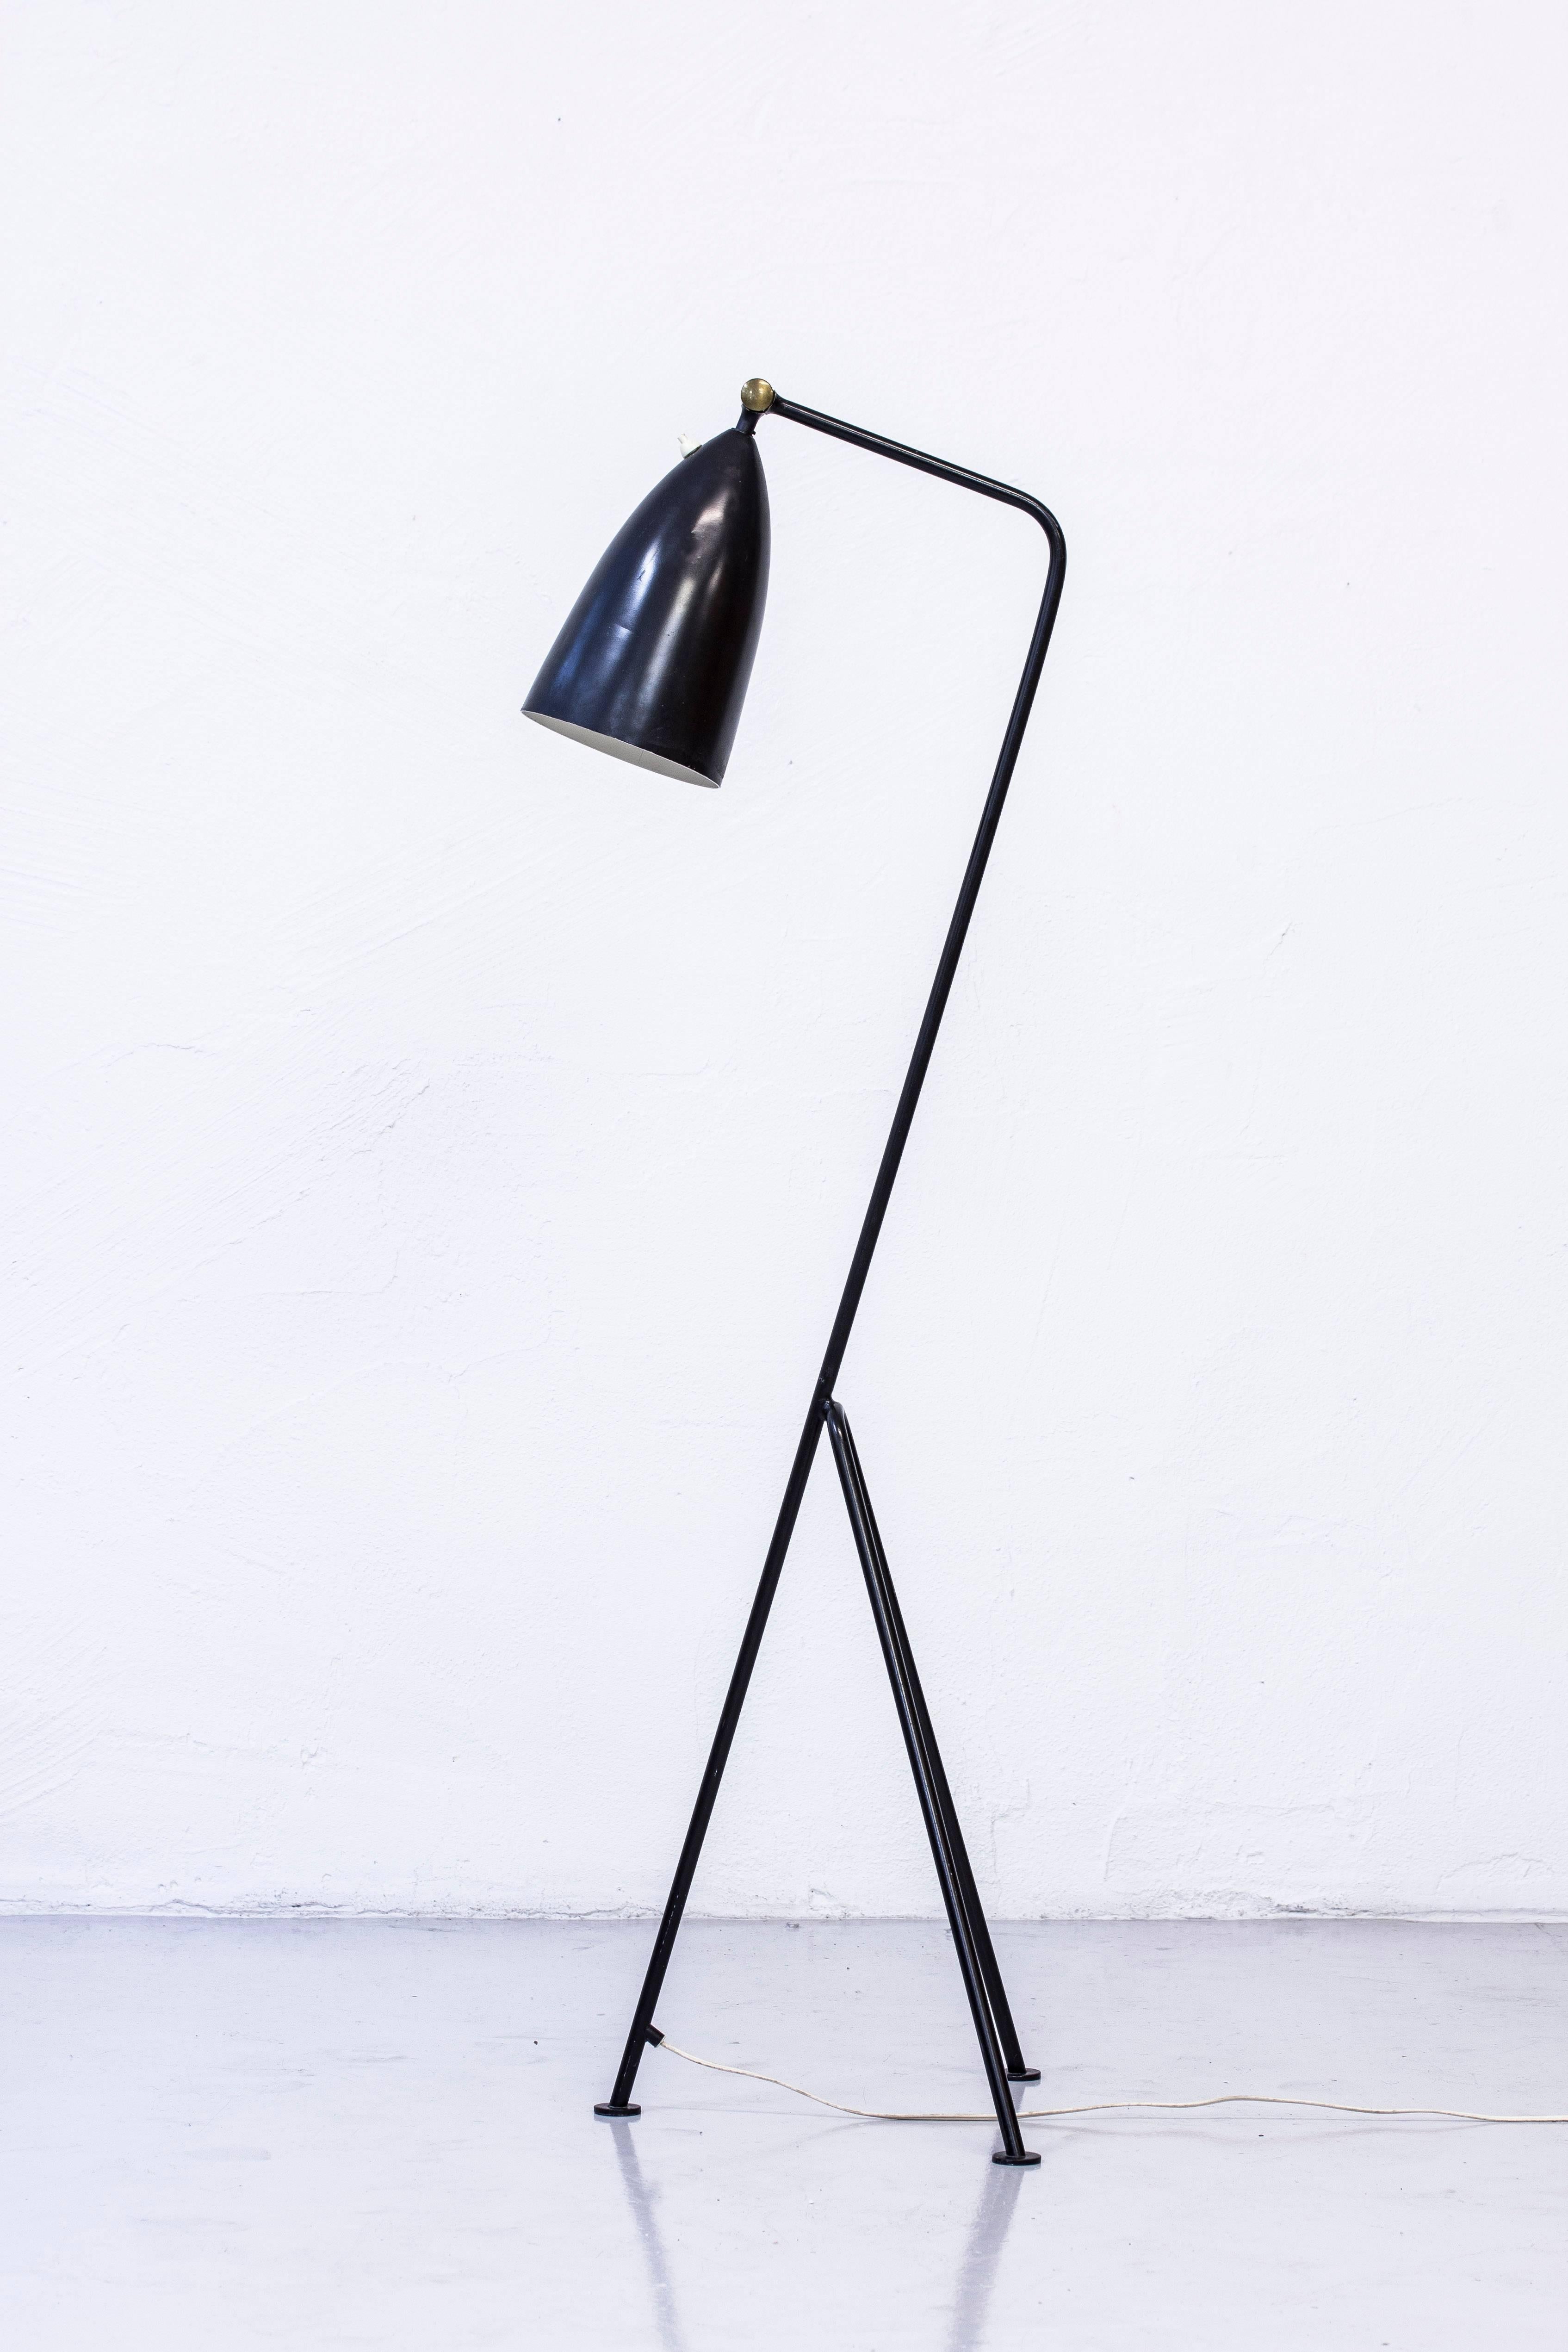 Grasshopper floor lamp model G33 produced in Sweden by Malmo company Bergbom. Original production from the 1950s. Black lacquered metal with polished brass joint. Freely adjustable up and down which enables it being used as both reading light and an